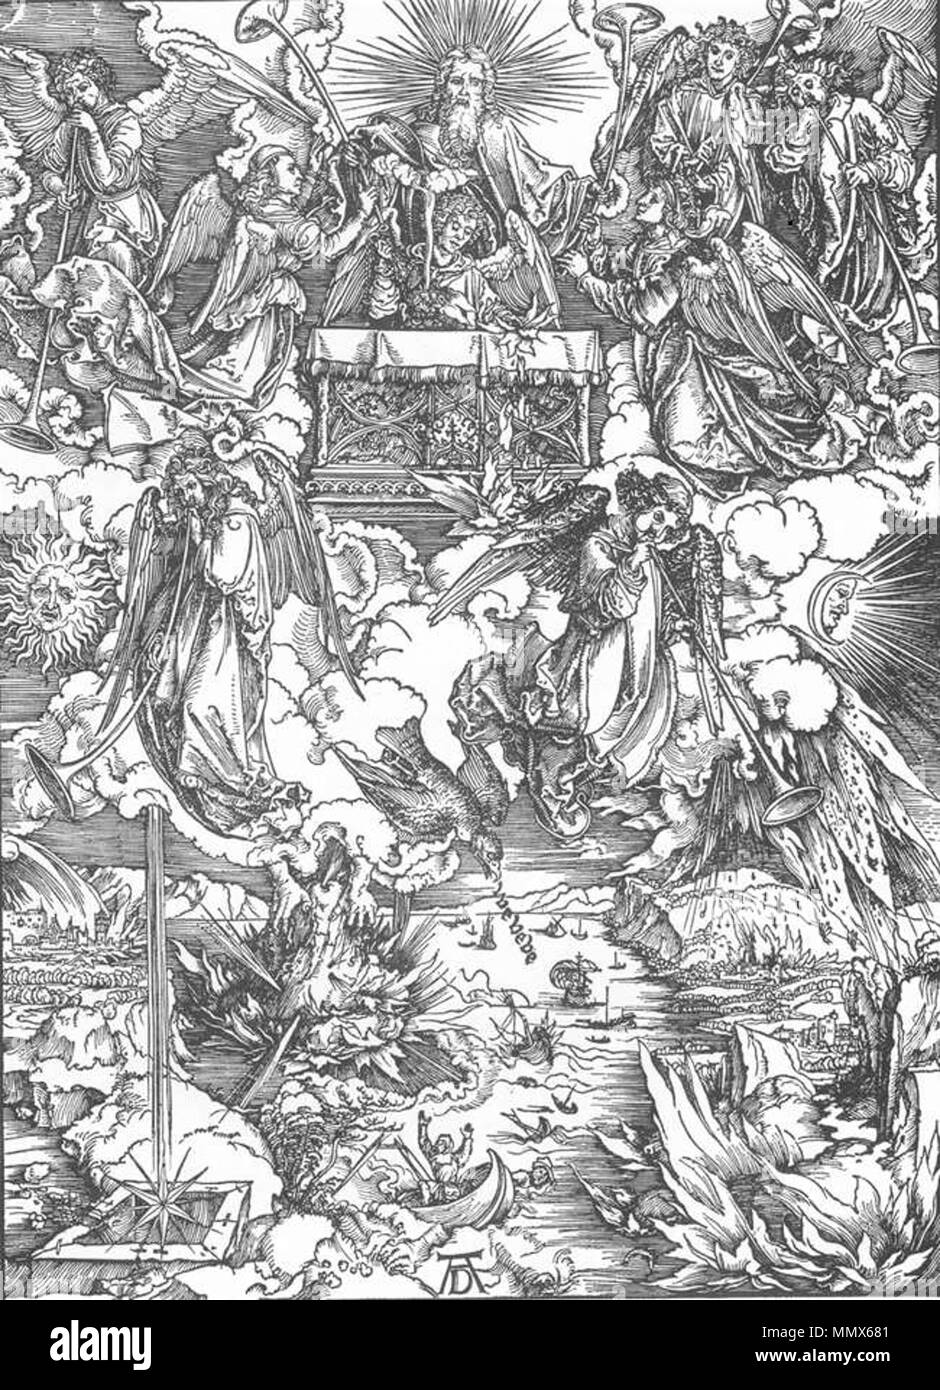 . The Revelation of St John: The Seven Trumpets Are Given to the Angels Woodcut, 39 x 28 cm Staatliche Kunsthalle, Karlsruhe  . between 1497 and 1498. see filename or category Durer, apocalisse, 07 sette trombe date agli angeli Stock Photo